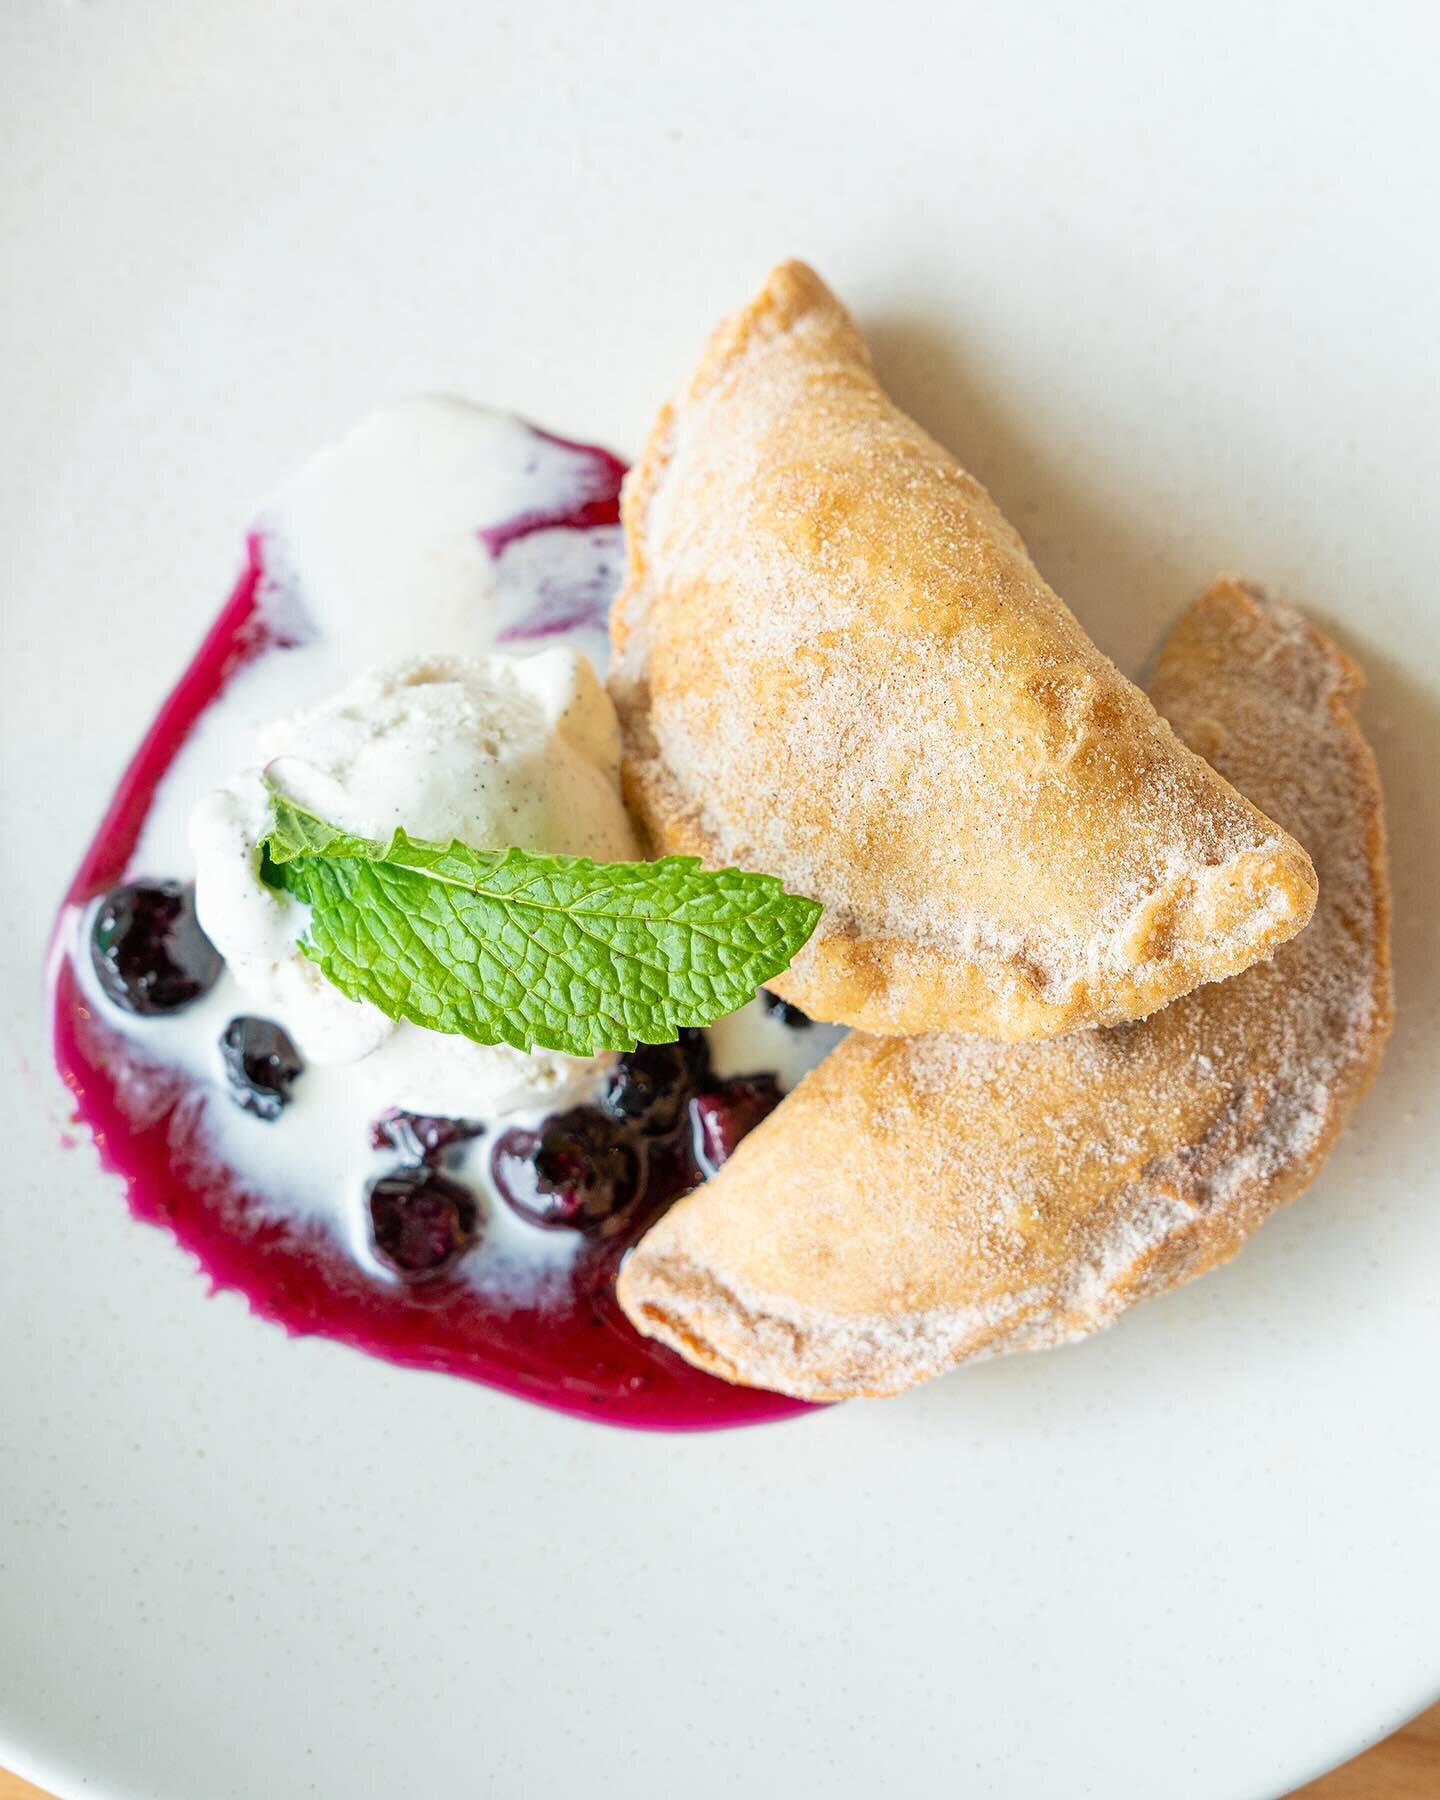 Empanadas de arroz con leche! 😋 Enjoy our new special from April 4th to the 14th and savor the warm flavors of cinnamon sugar rice pudding wrapped in a crispy empanada shell, topped with luscious blueberry sauce and a scoop of creamy vanilla ice cre